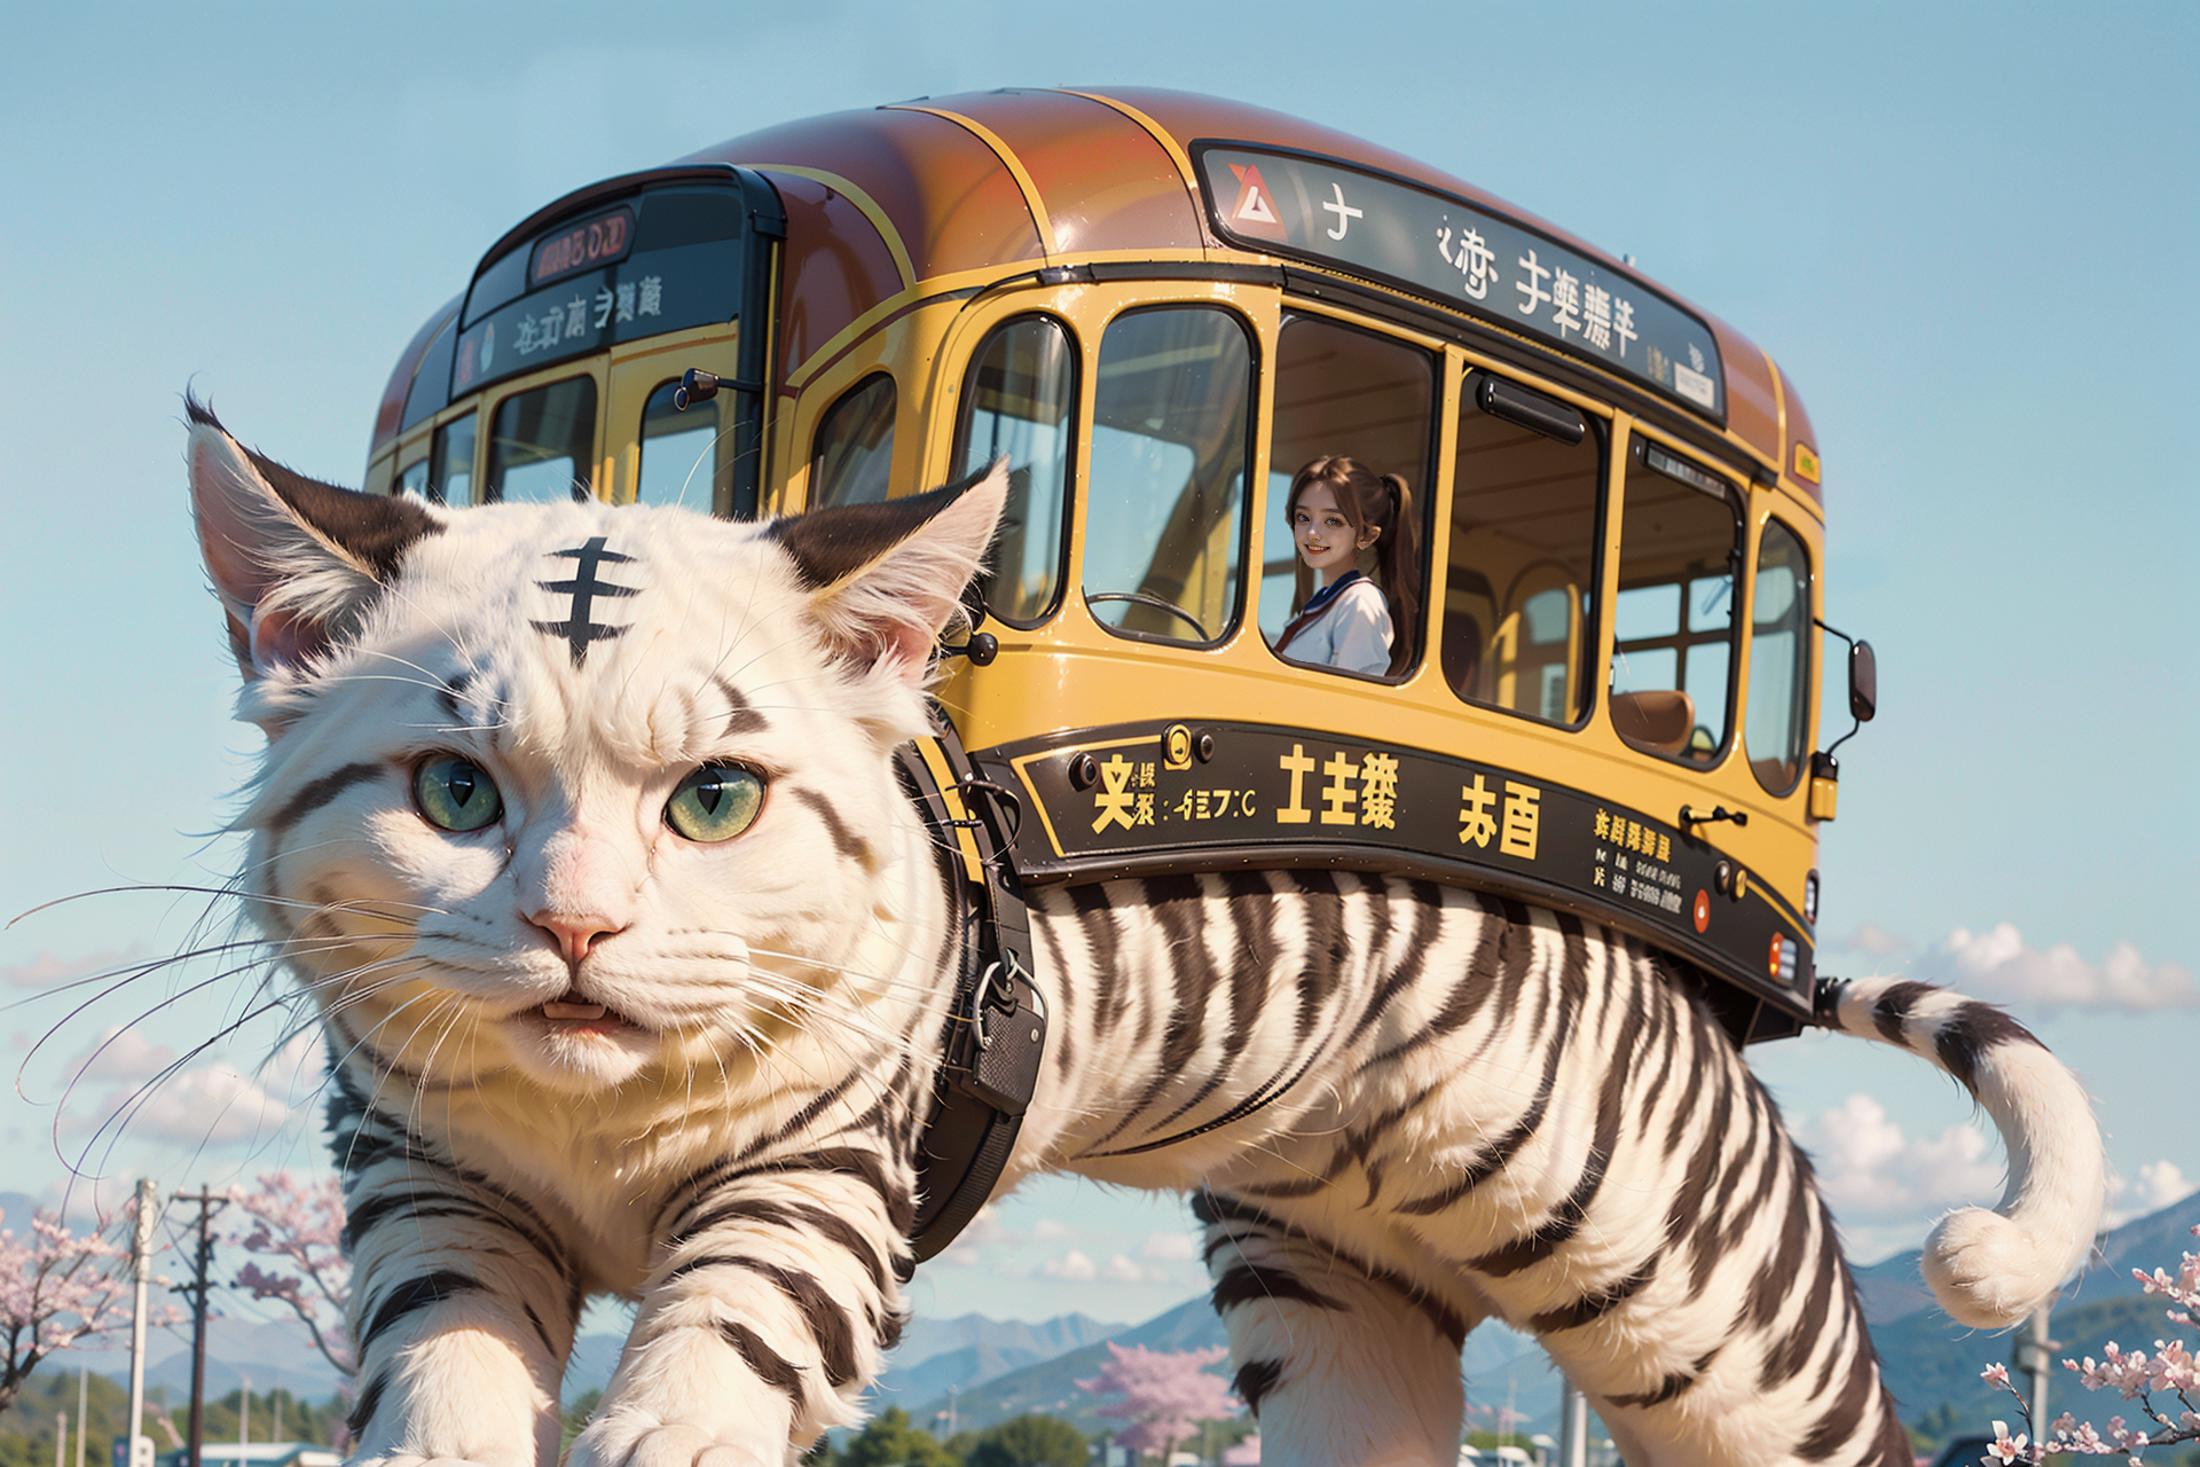 A cat riding a bus with a tiger painting on it.